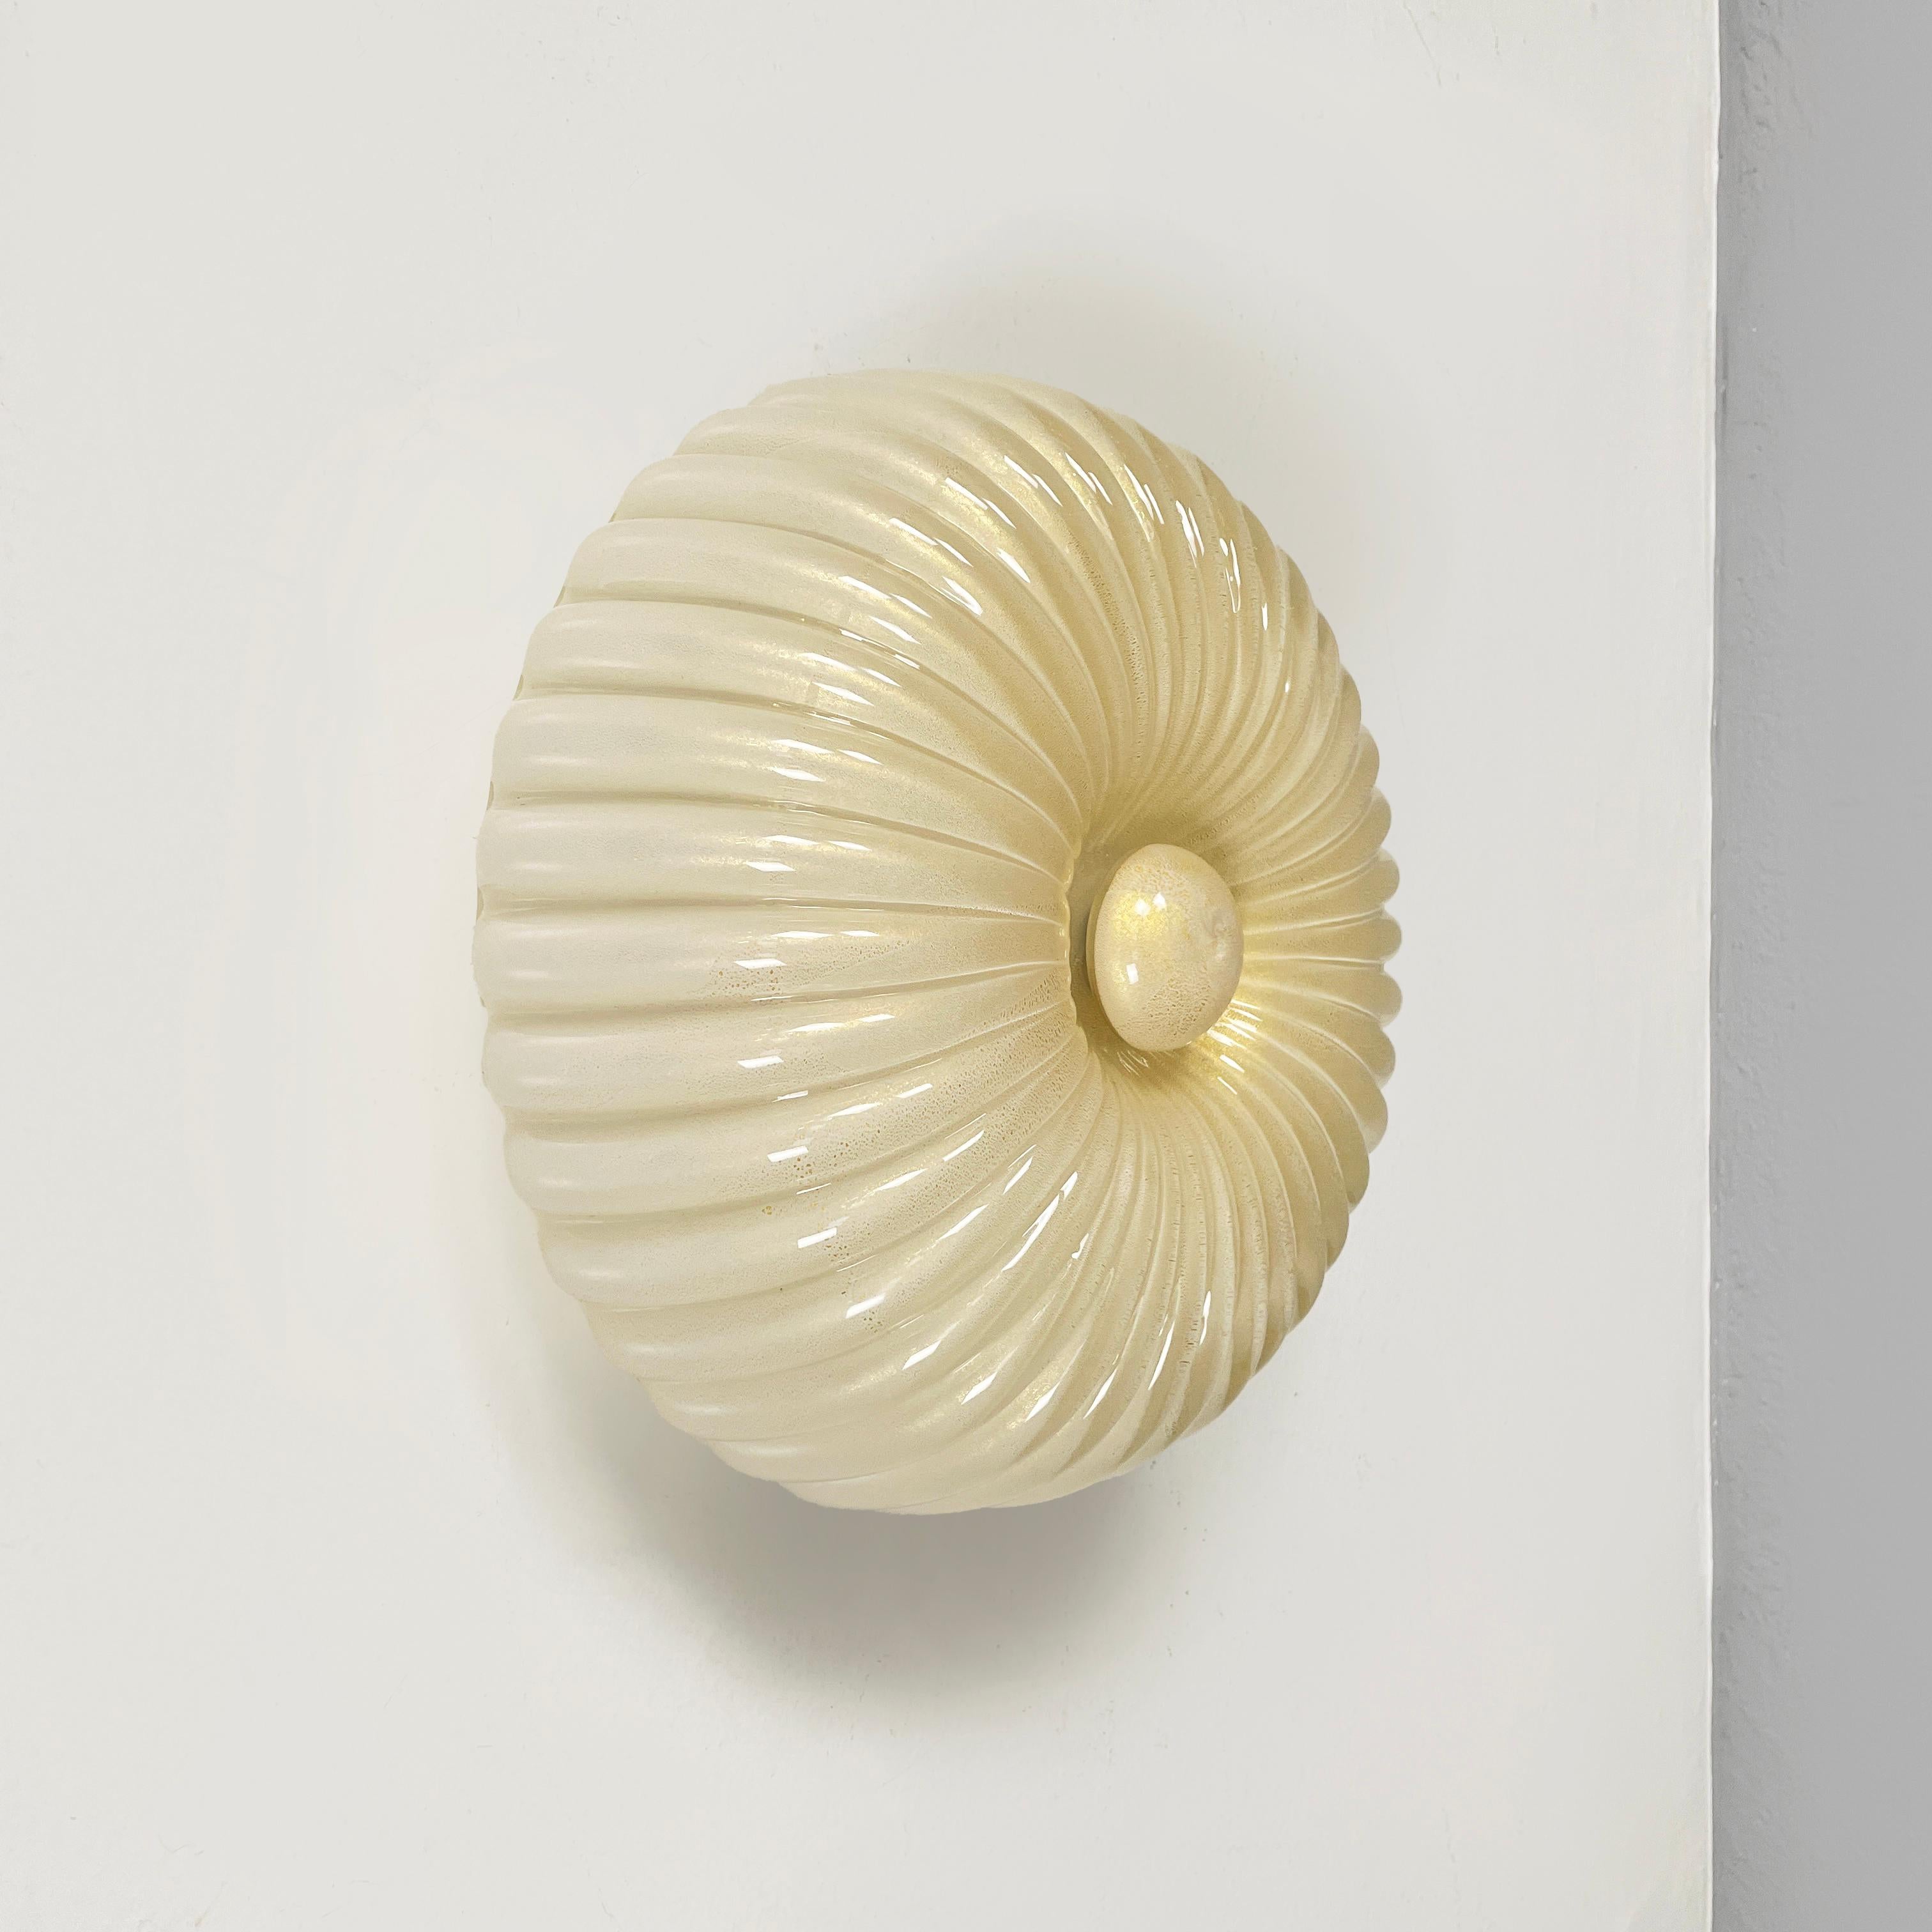 Italian mid-century modern opaline glass ceiling with gold dust lamp by Barovier&Toso, 1960s
Ceiling lamp with a round base in opaline glass decorated with gold dust. The diffuser has concentric decorative grooves with a circle in the center, also